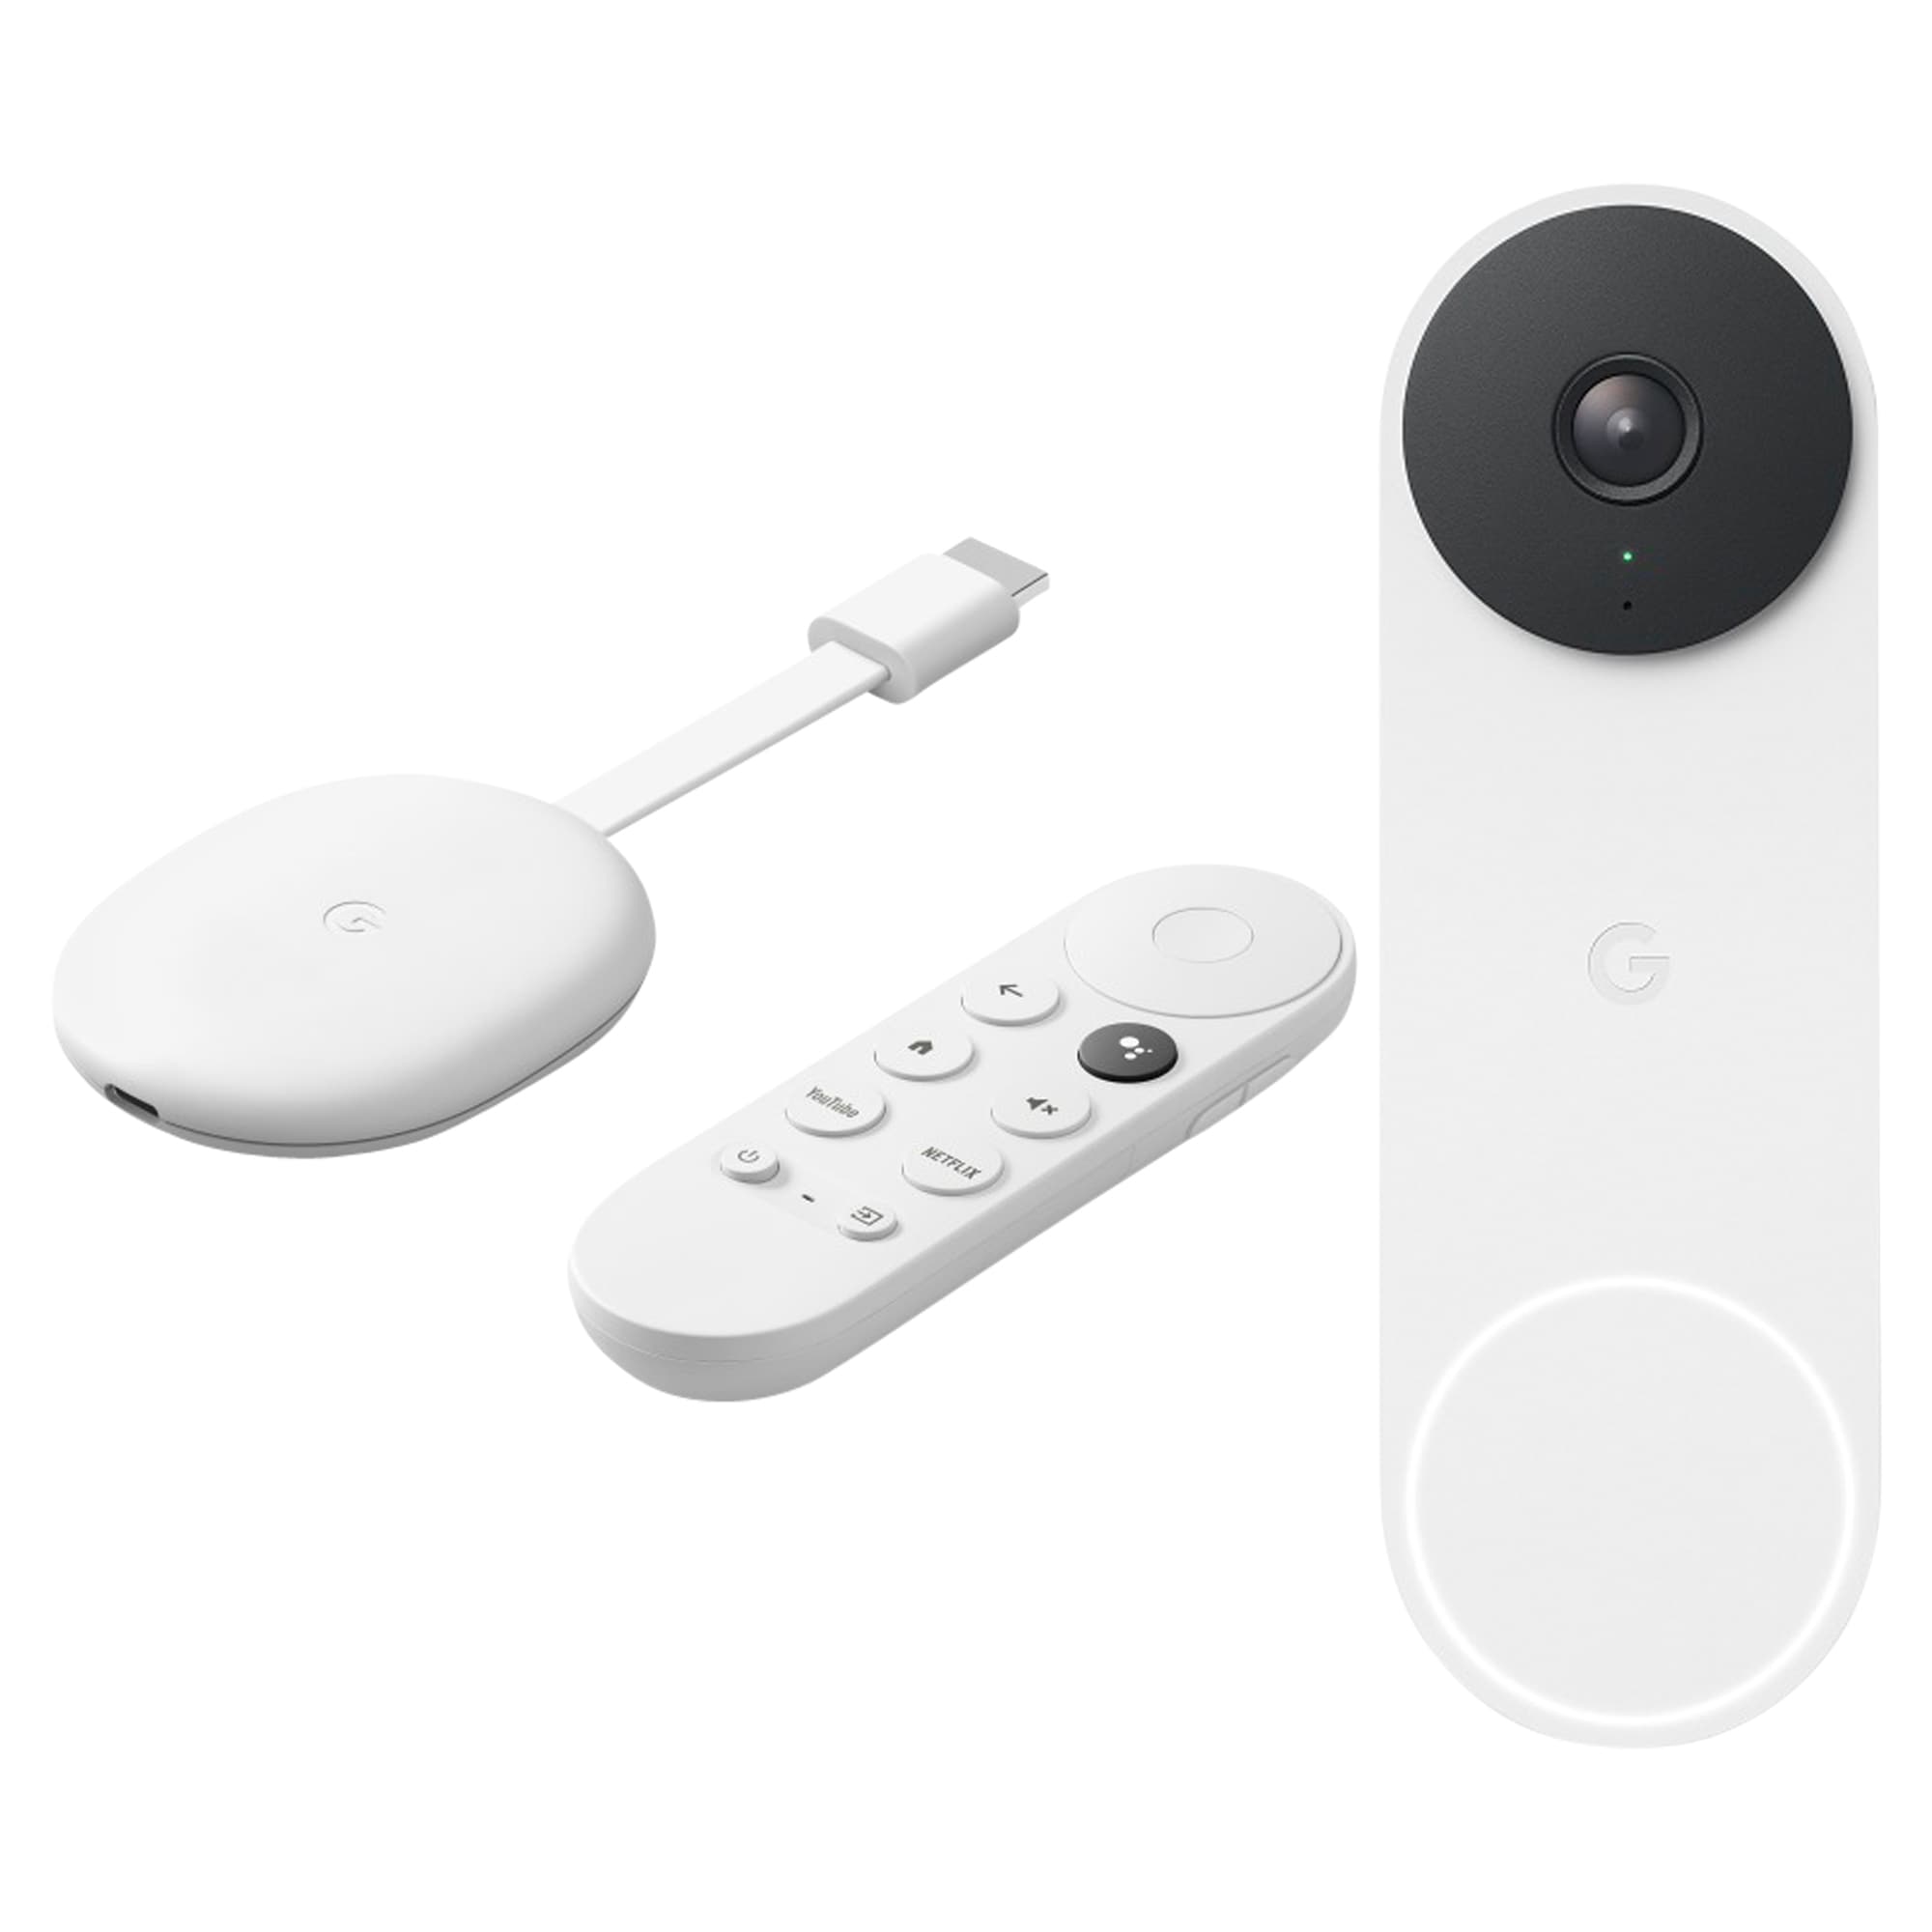 Shop Nest Doorbell Wired Smart Doorbell Security Camera in Snow + Chromecast with Google TV 4K in at Lowes.com